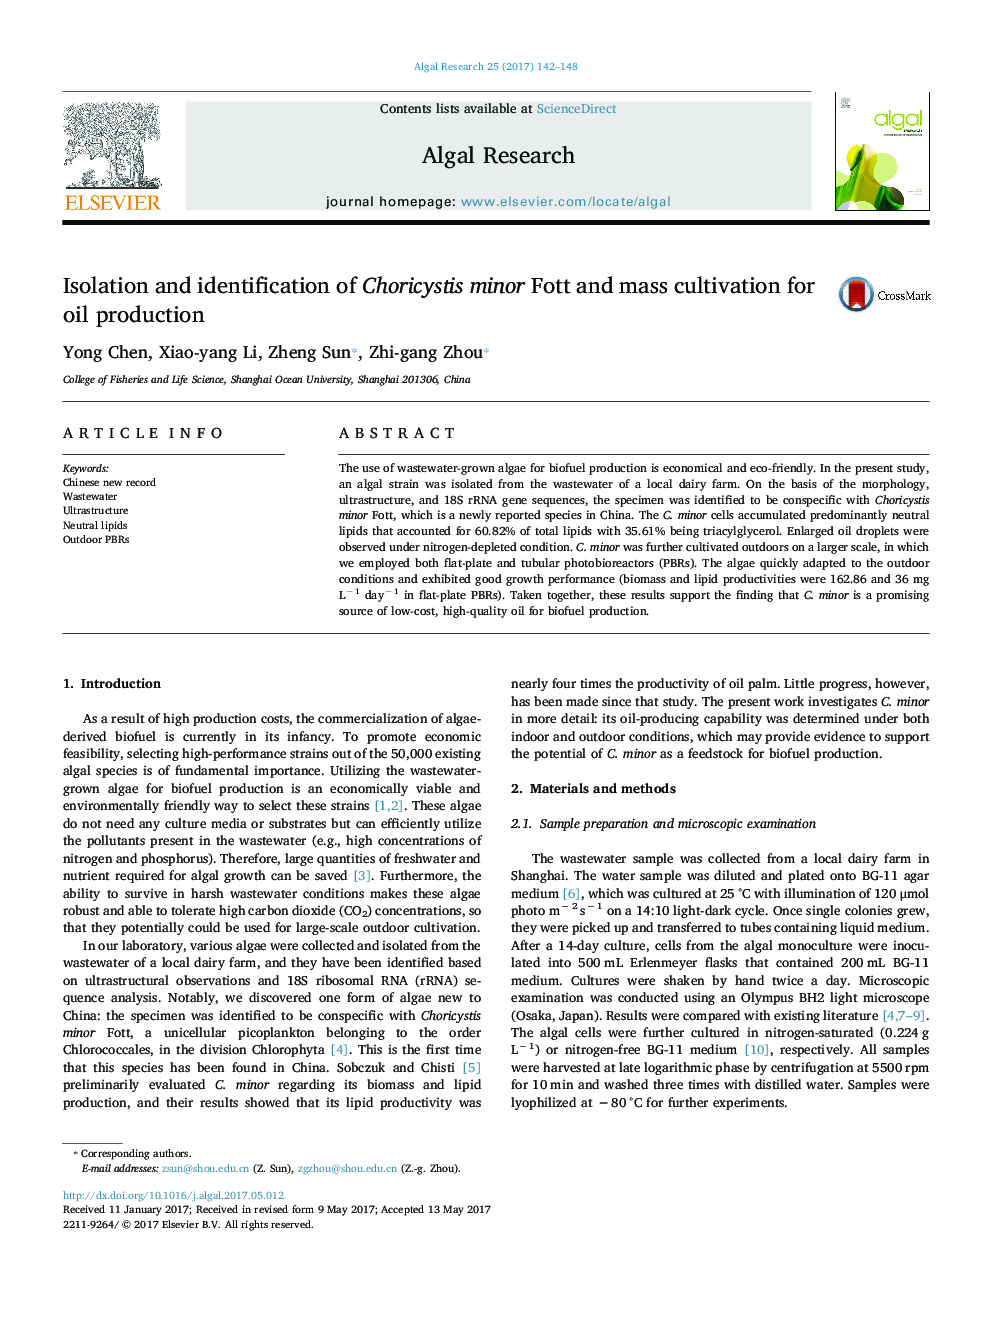 Isolation and identification of Choricystis minor Fott and mass cultivation for oil production